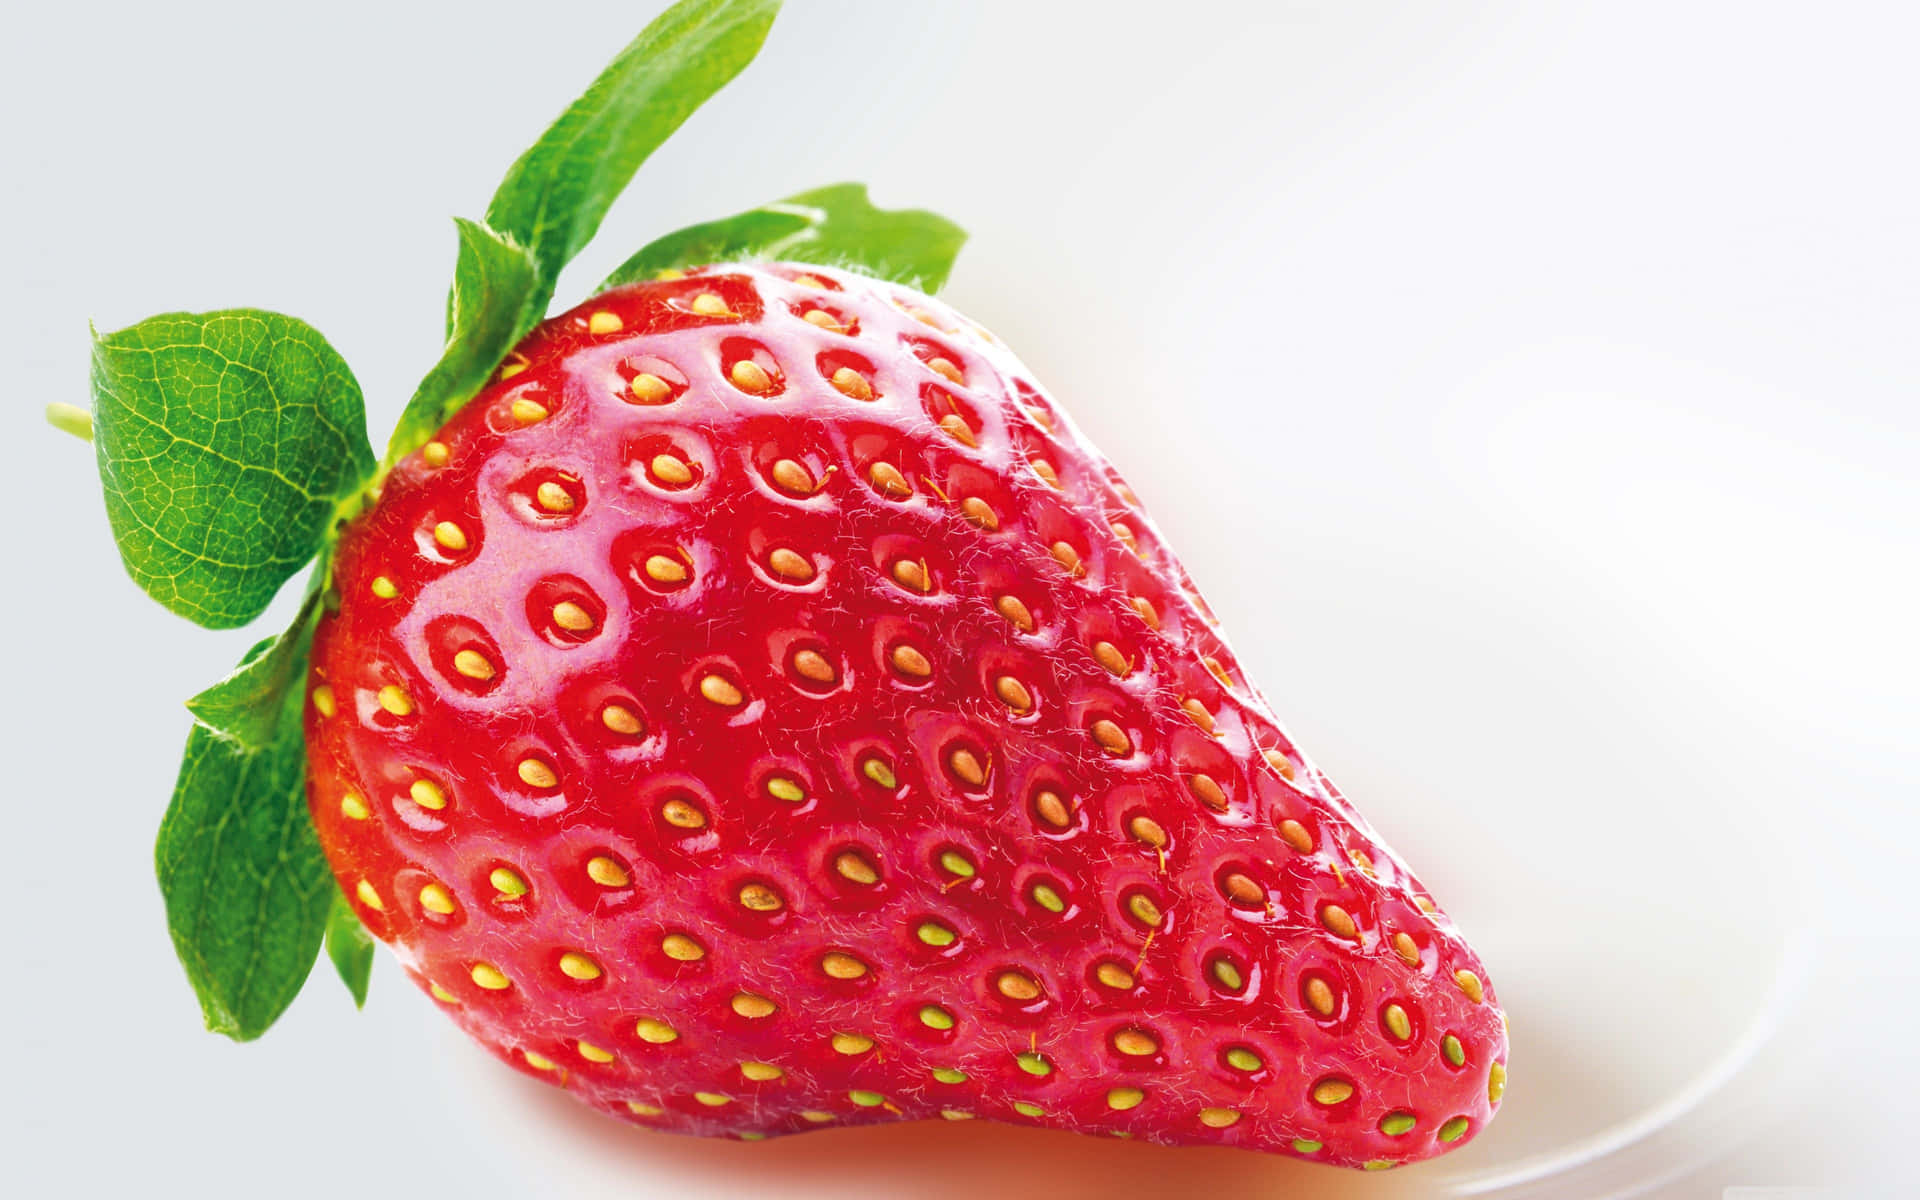 Caption: Fresh and Juicy Red Strawberries Wallpaper